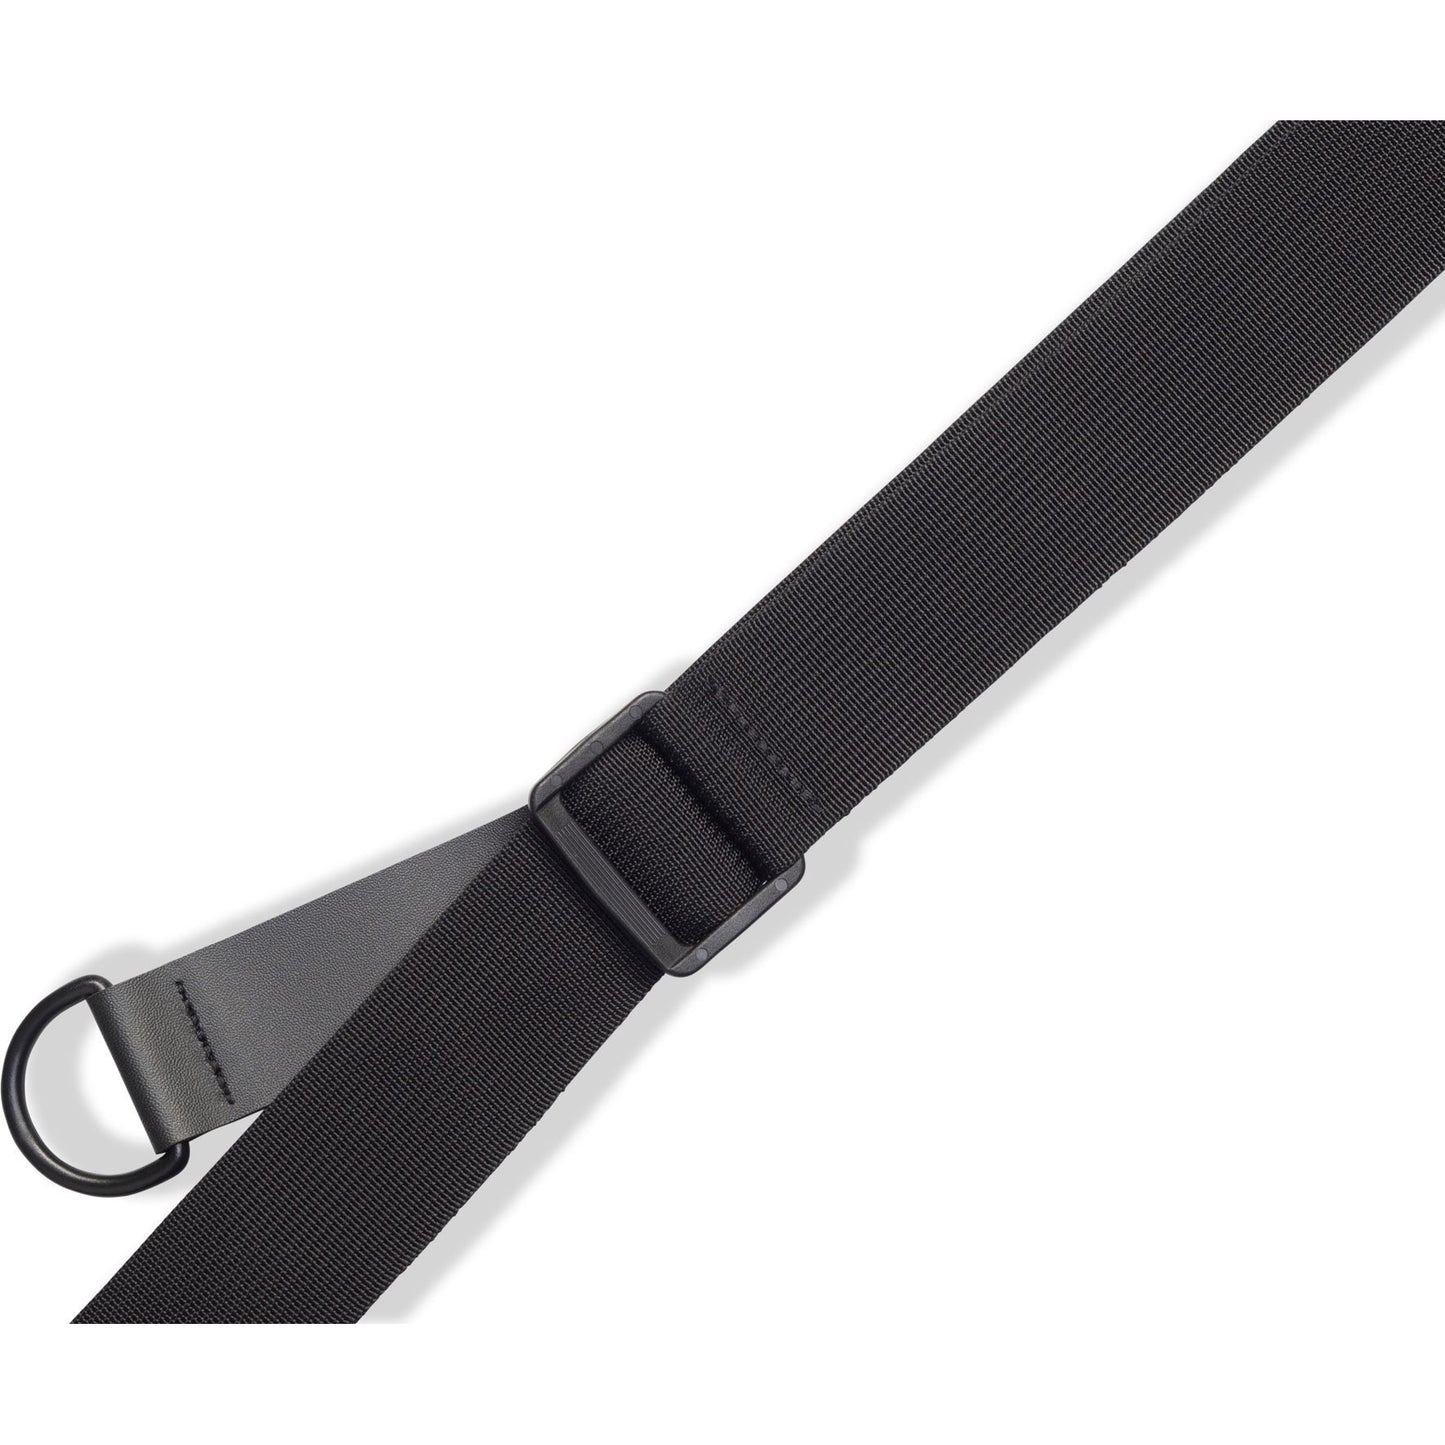 Levy's Right Height Padded Leather Guitar Strap, Black, MRHGP-BLK